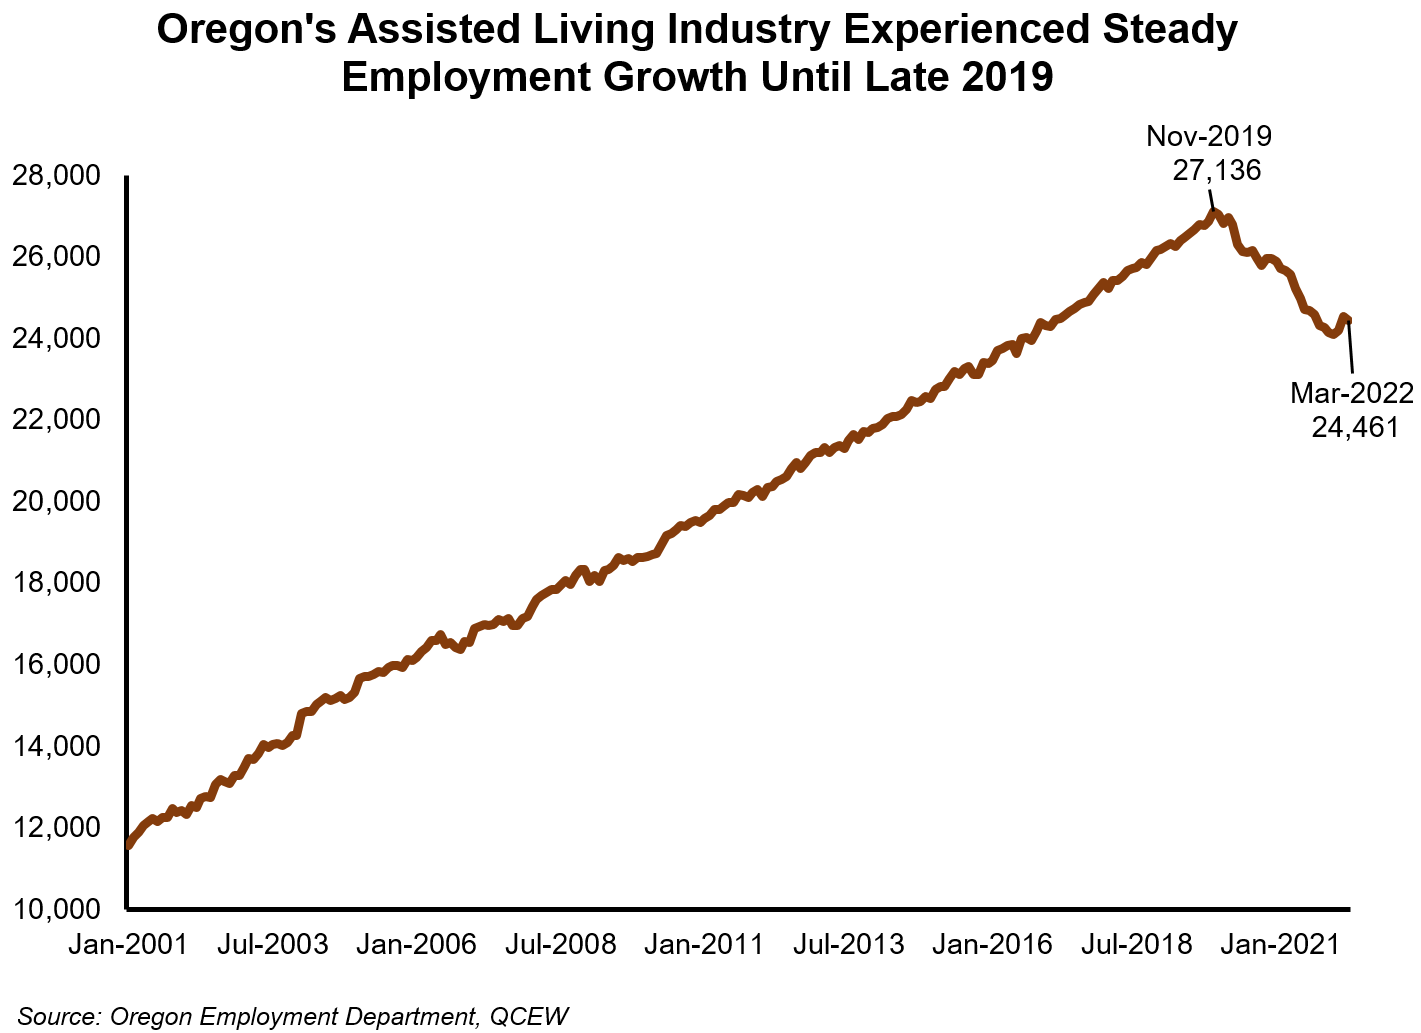 Graph showing Oregon's assisted living industry experienced steady employment growth until late 2019